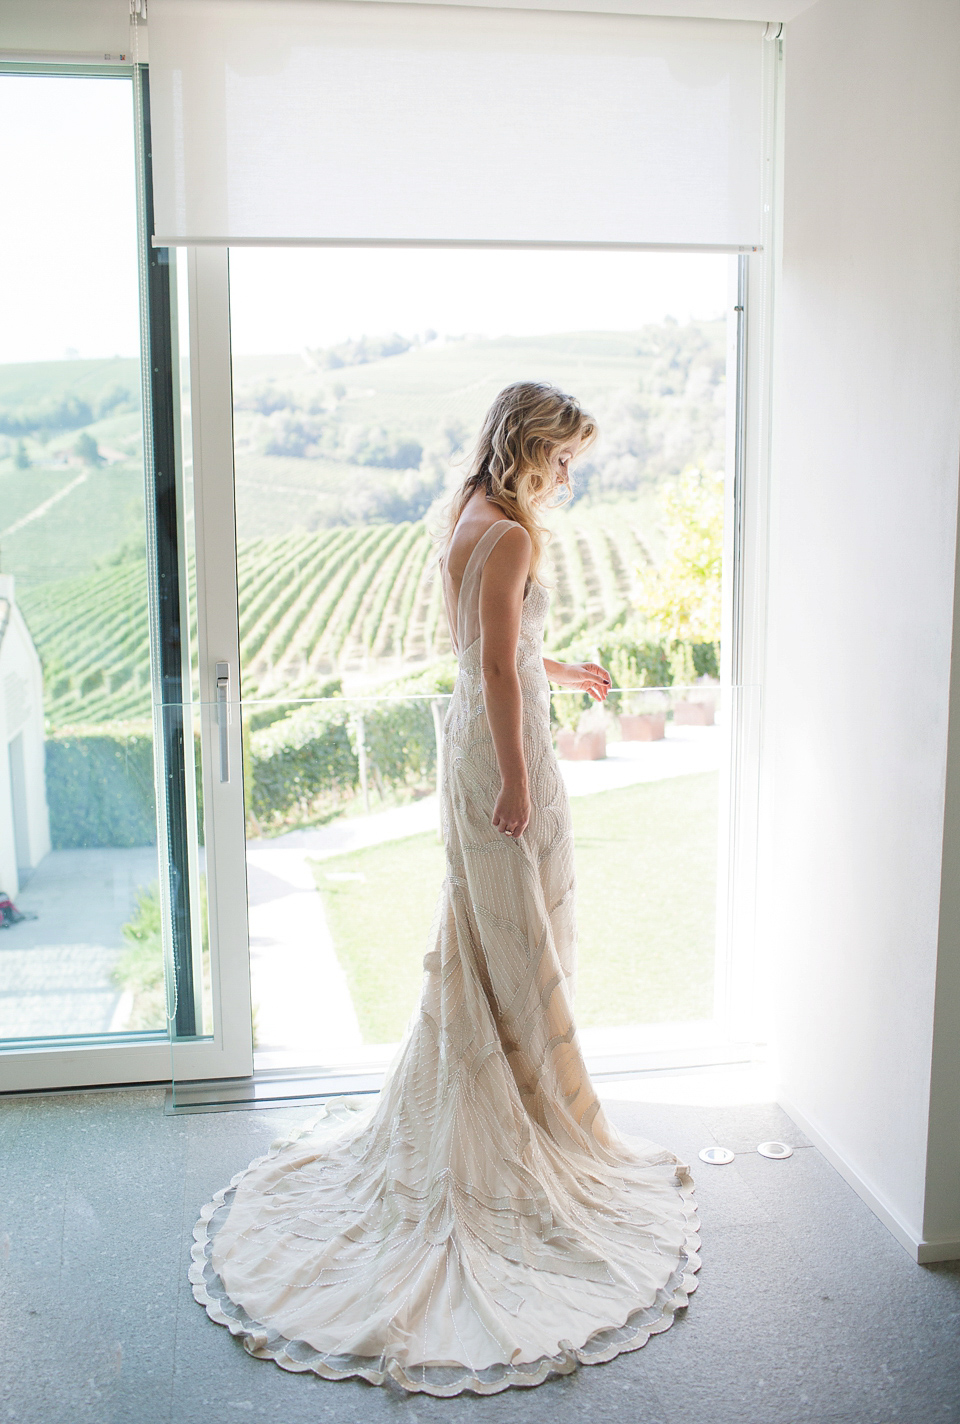 Katherine wore the Gianna Marie gown for her Vanity Fair inspired glamorous destination wedding in the Italian countryside. Photography by James Allan.